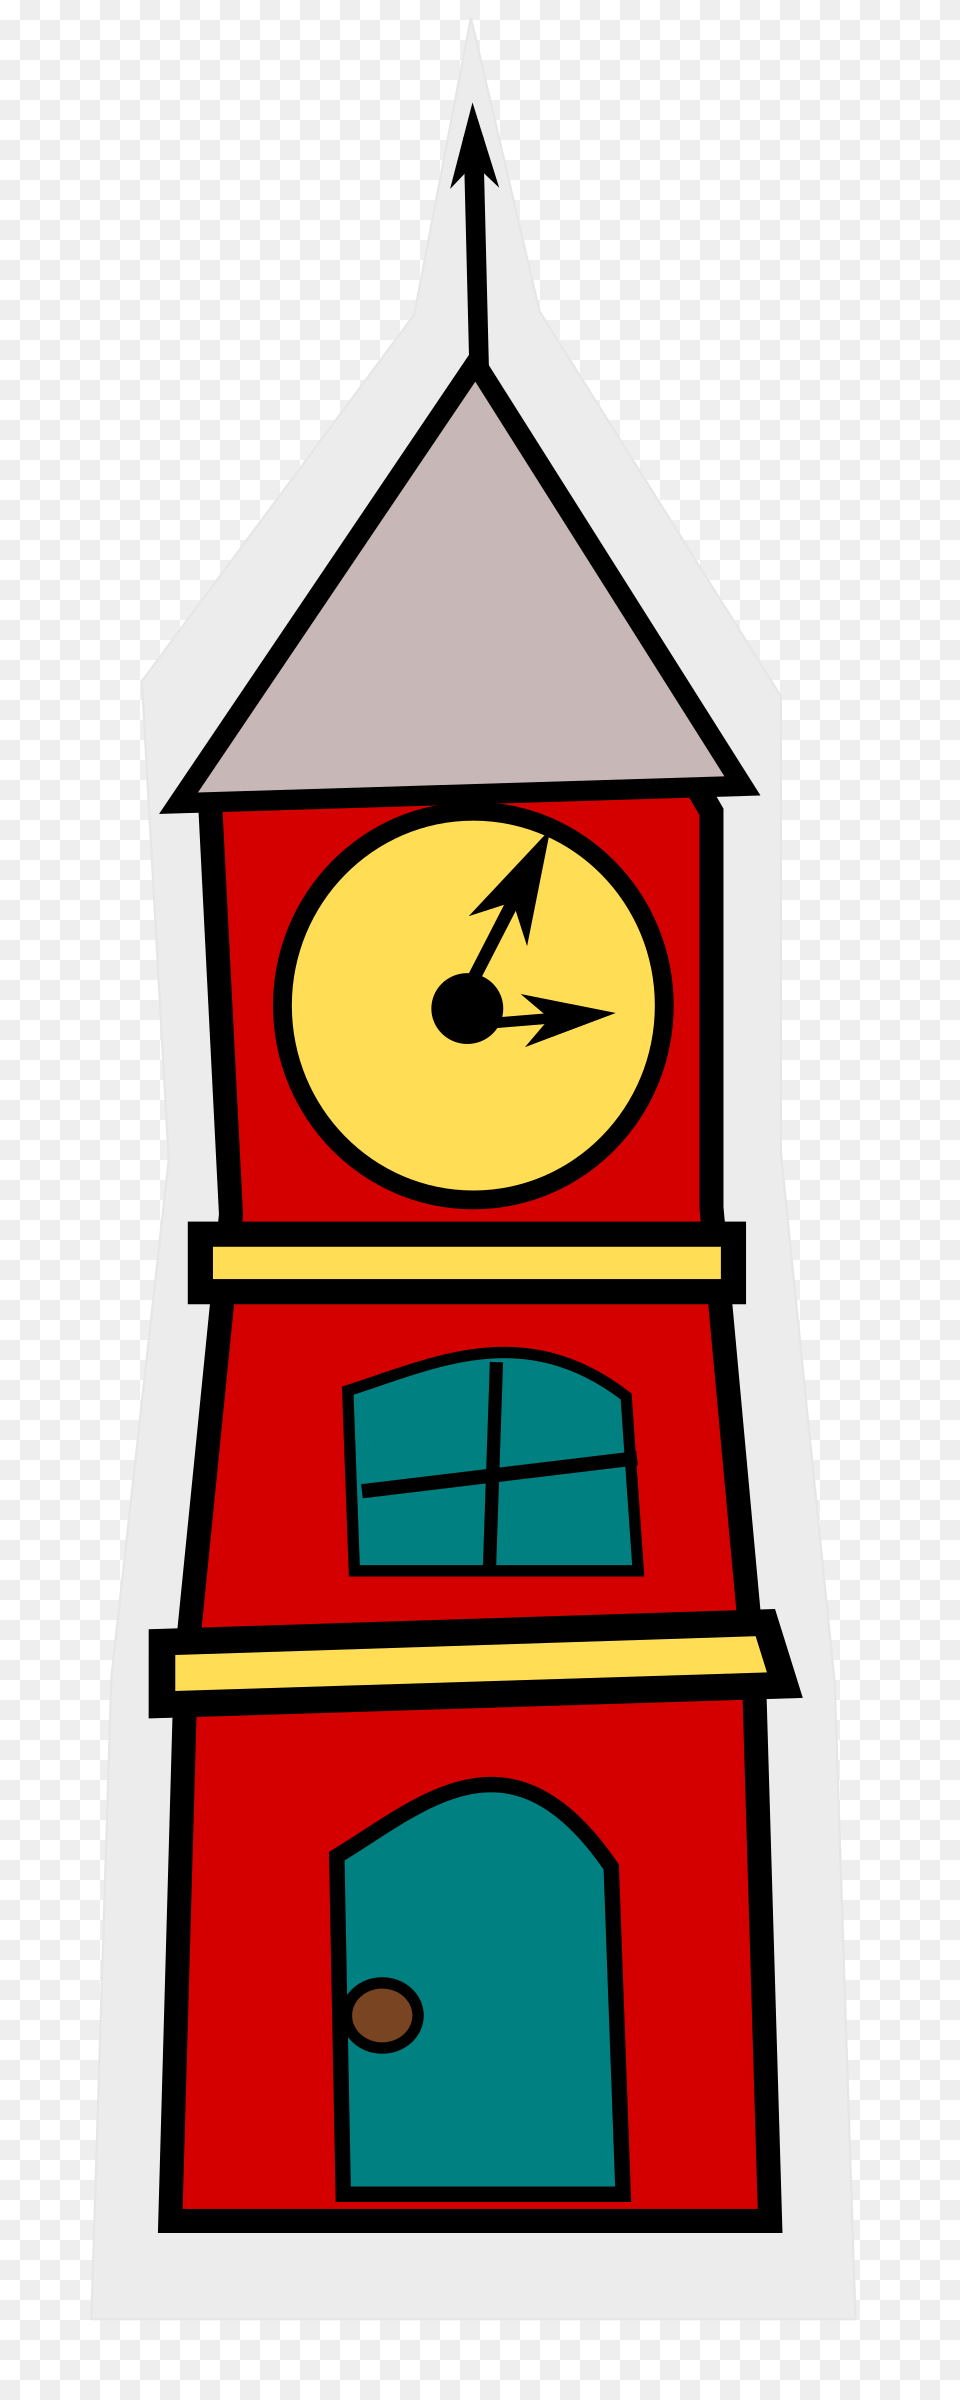 Town Hall Tower Clip Art, Architecture, Building, Clock Tower, Bell Tower Png Image